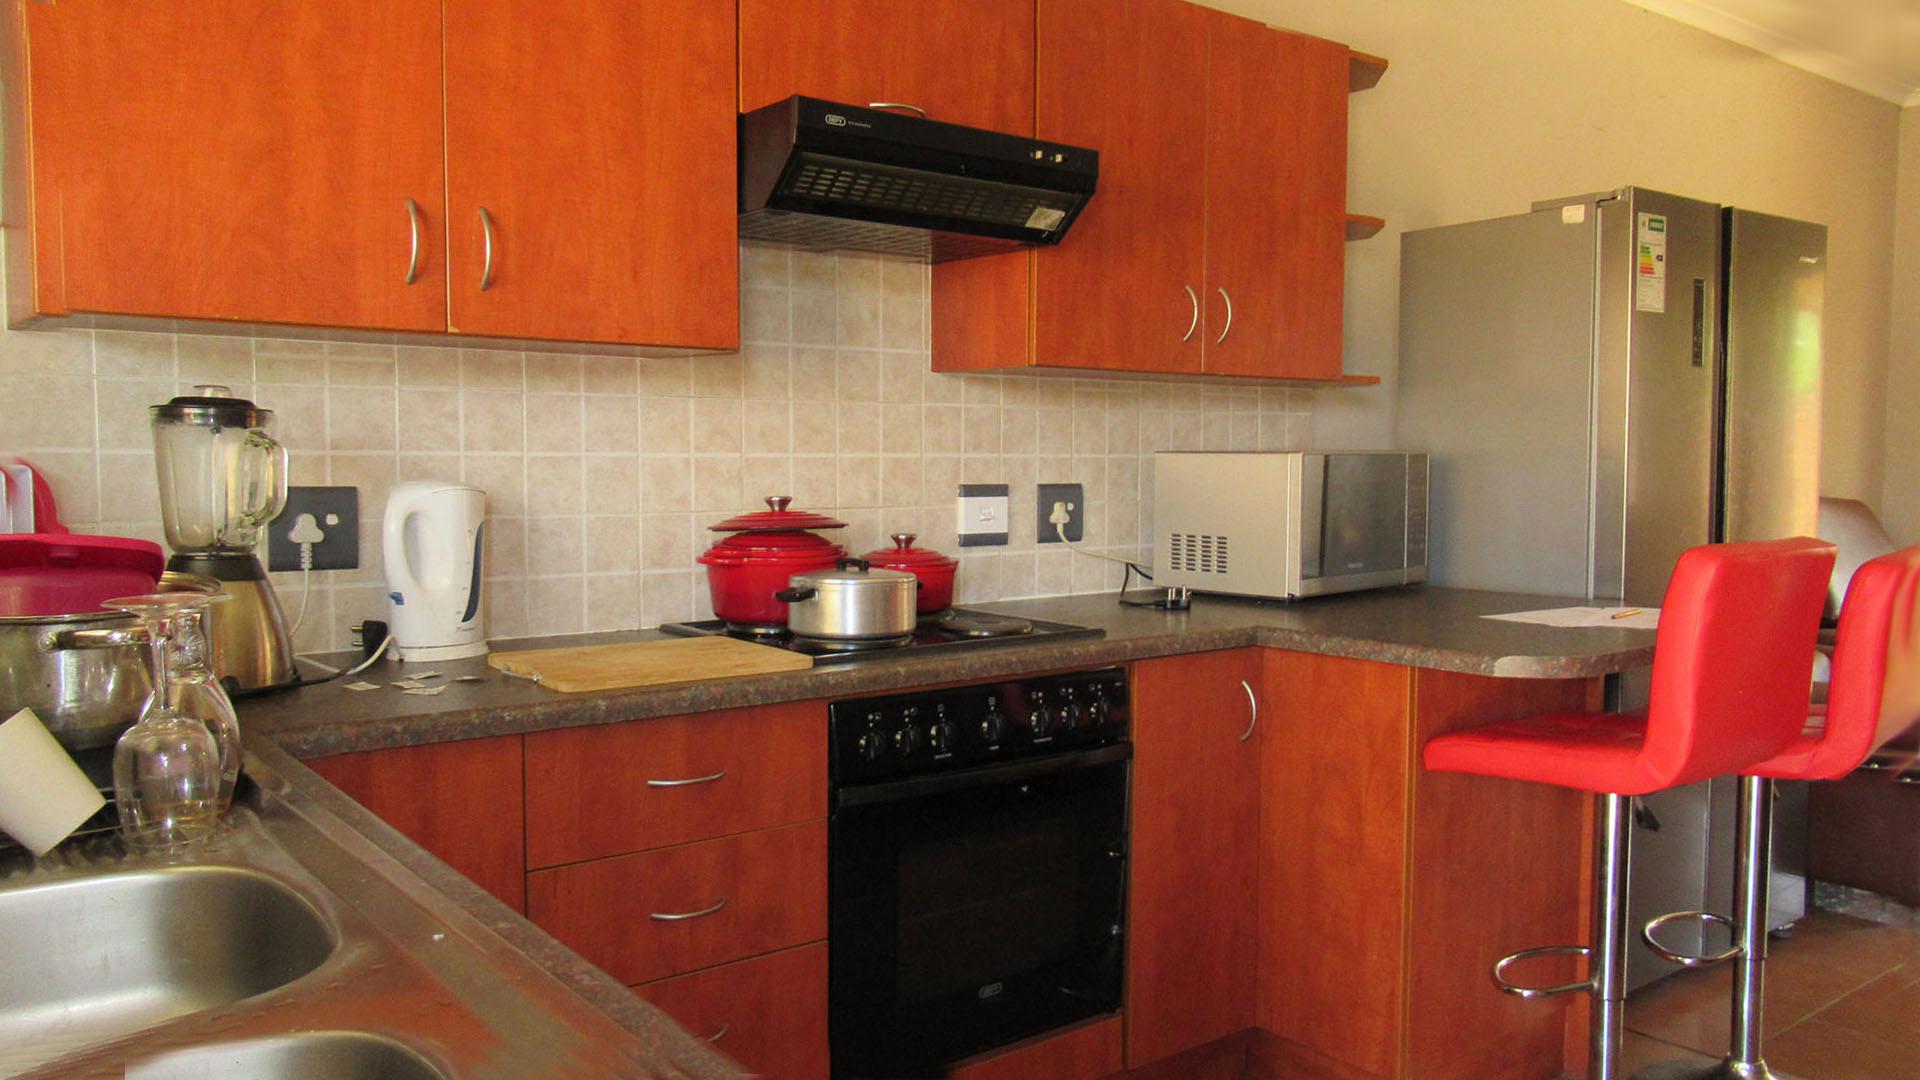 Kitchen - 15 square meters of property in Meyerton